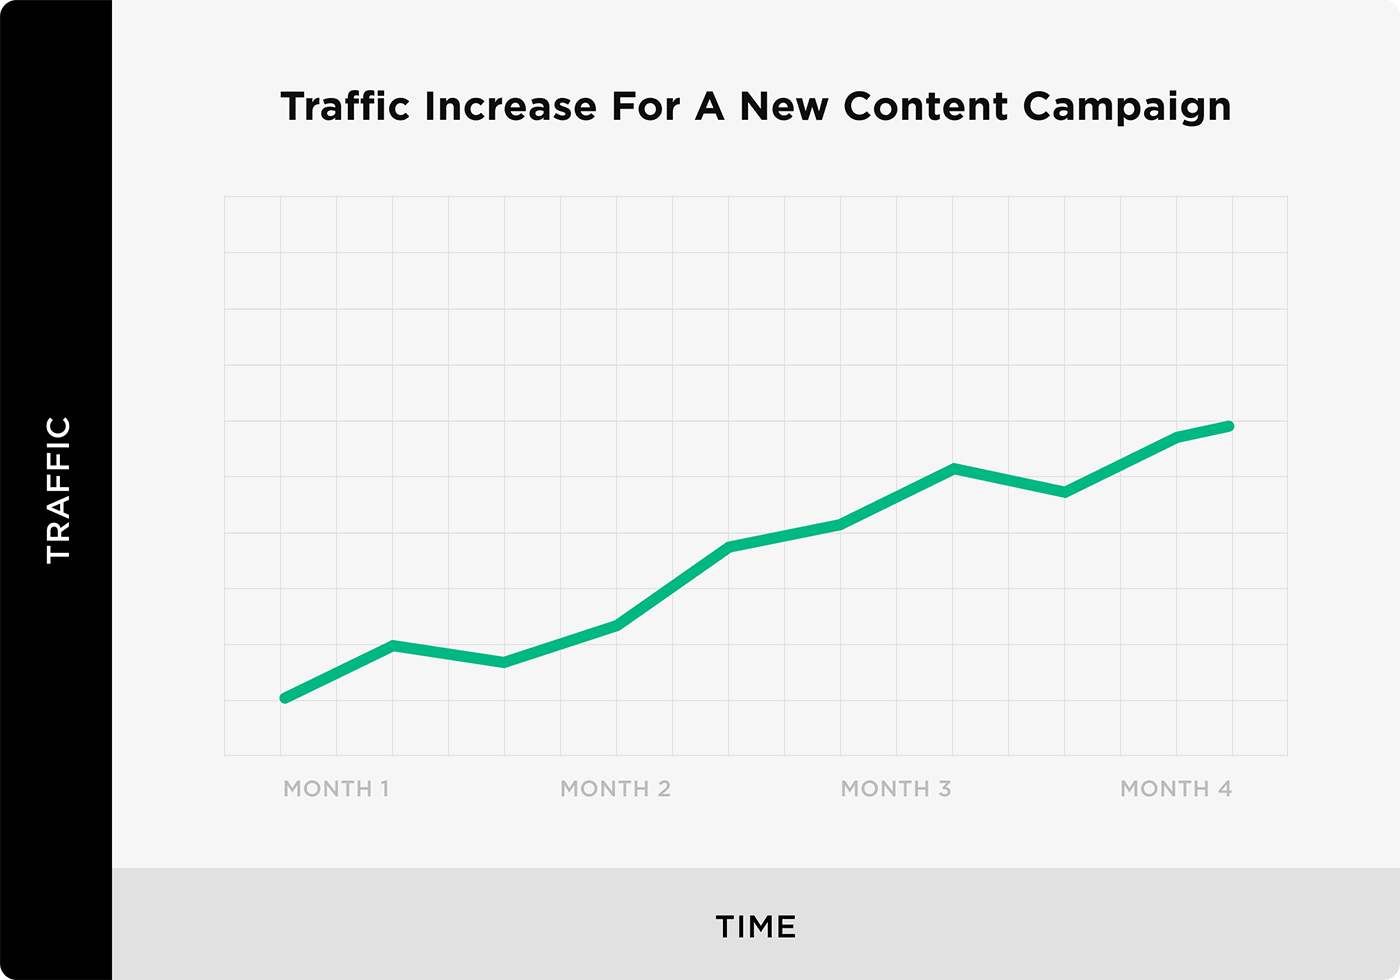 Traffic increase for a new content campaign